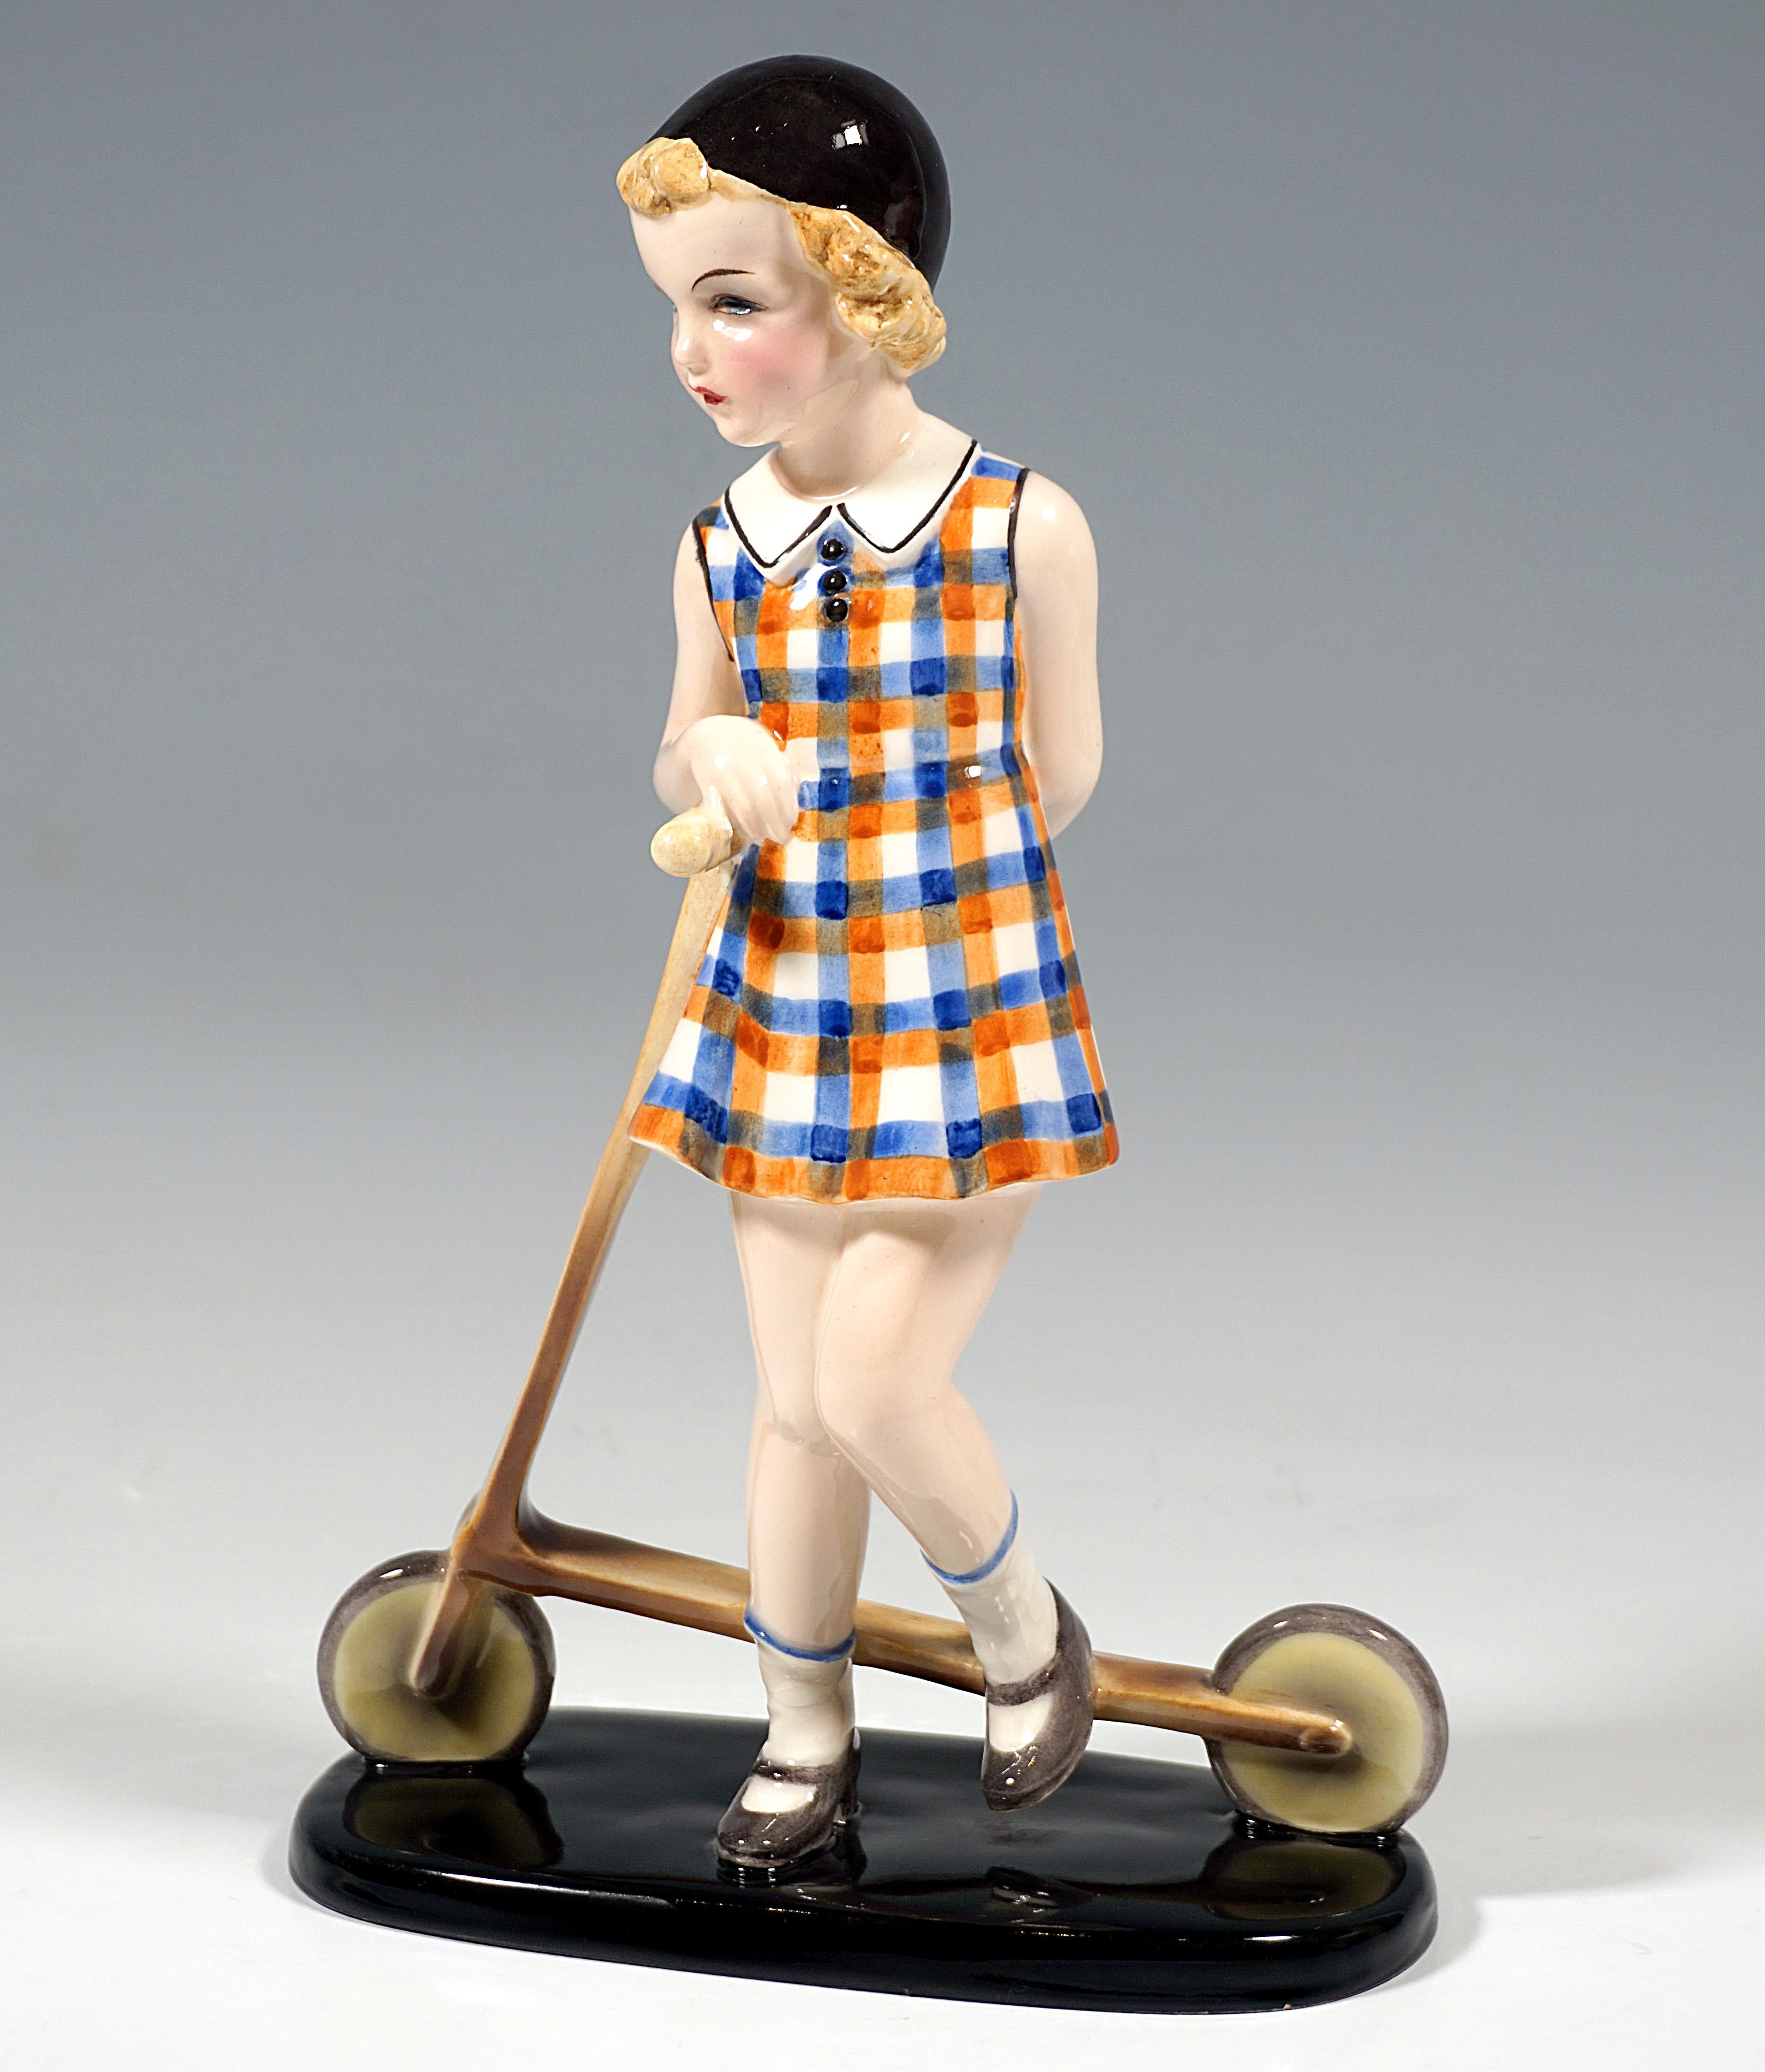 Rare Goldscheider Vienna Figurine of the 1930s.
Girl with a black cap, in a blue, orange and white checkered dress with a white collar, white stockings and brown shoes, leaning on a wooden scooter.
On a black, elongated flat base with rounded